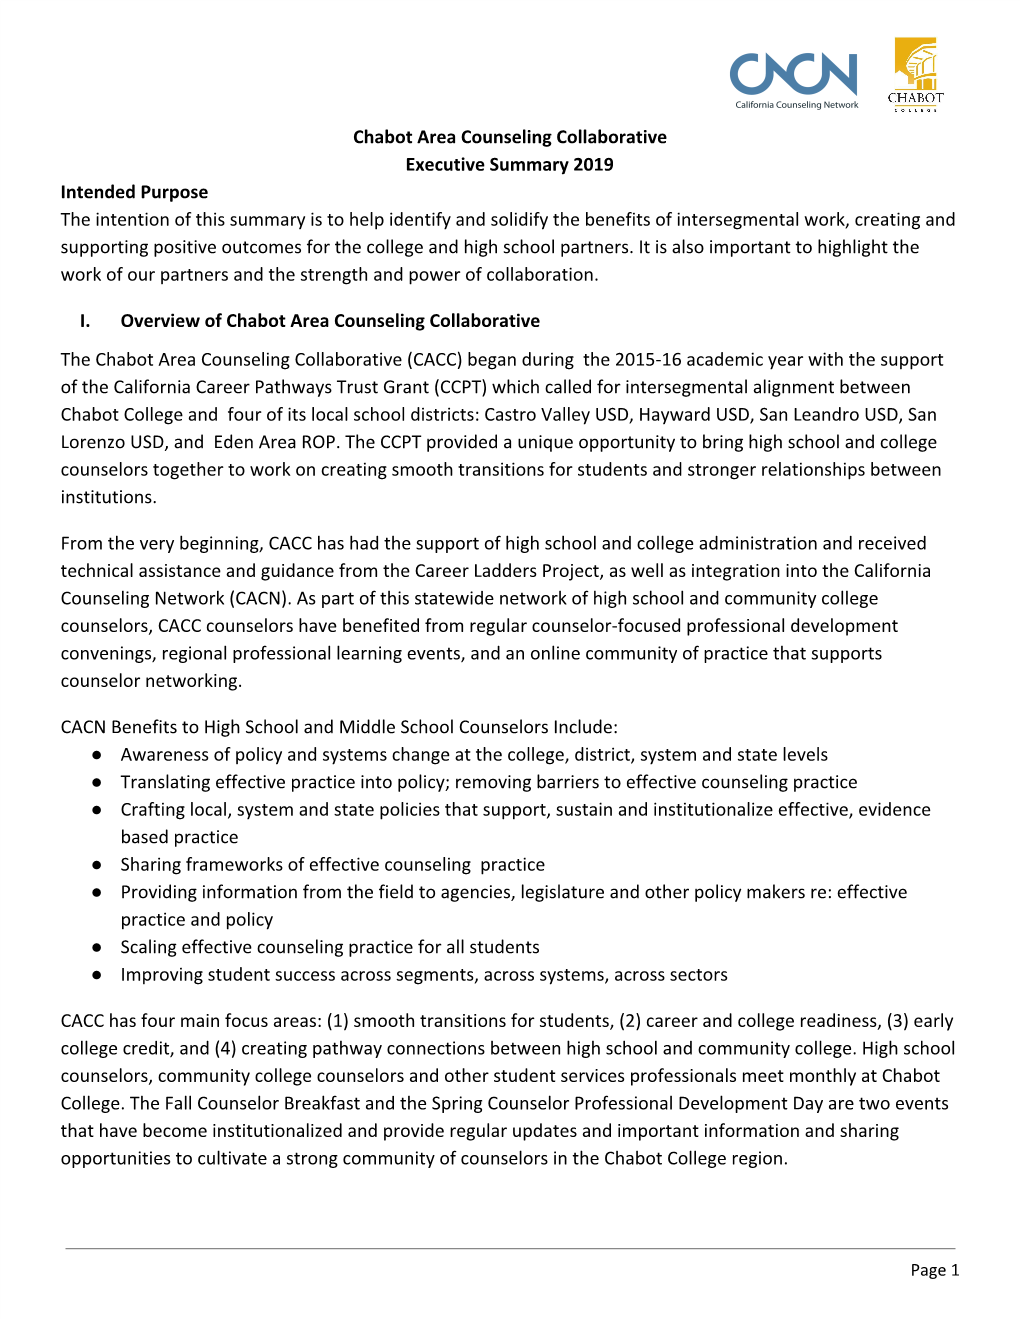 Chabot Area Counseling Collaborative Executive Summary